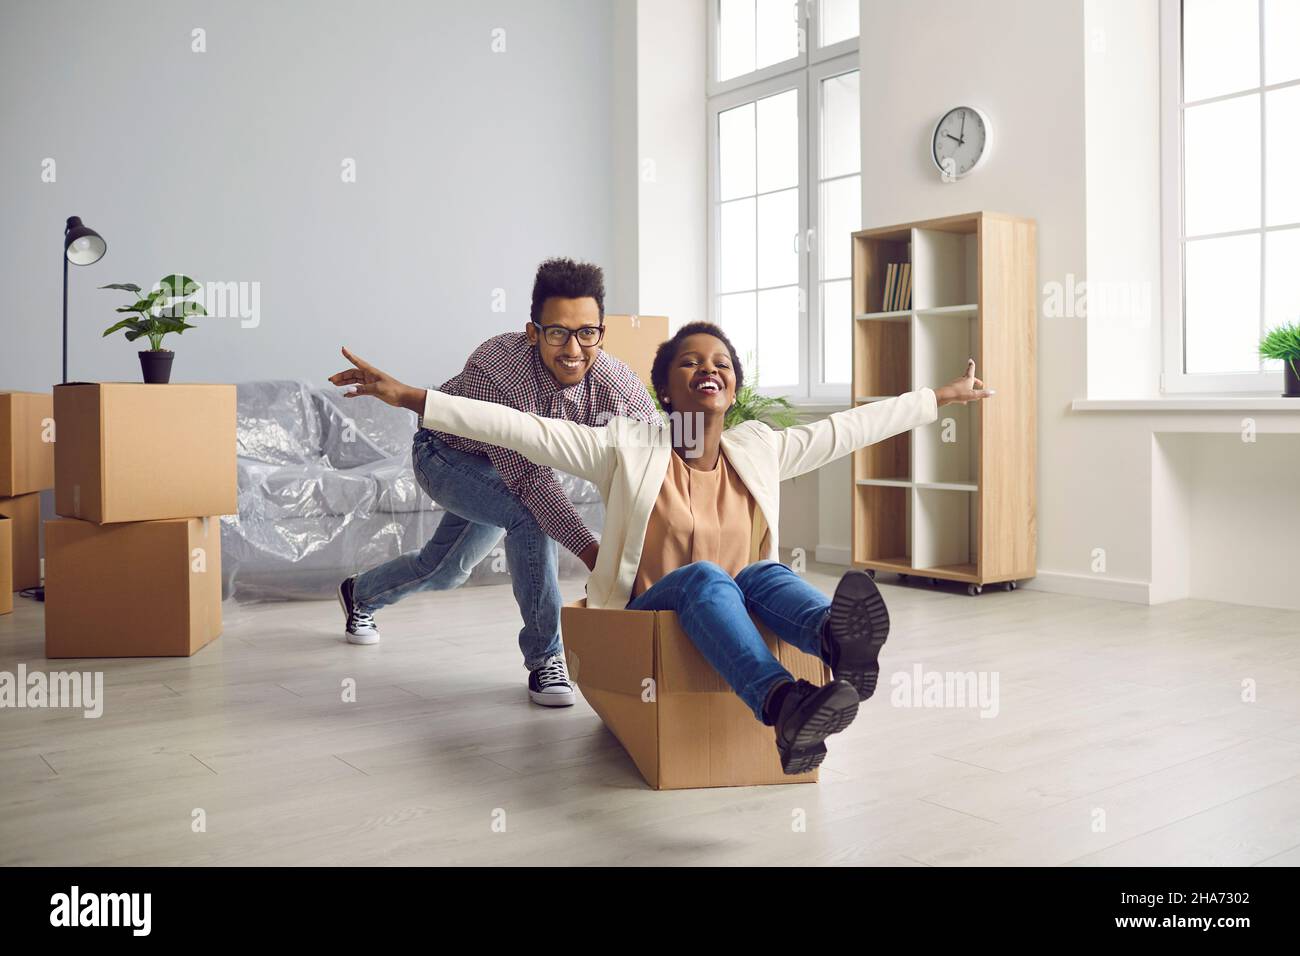 Cheerful young couple moving into their first own home having fun and rejoicing. Stock Photo